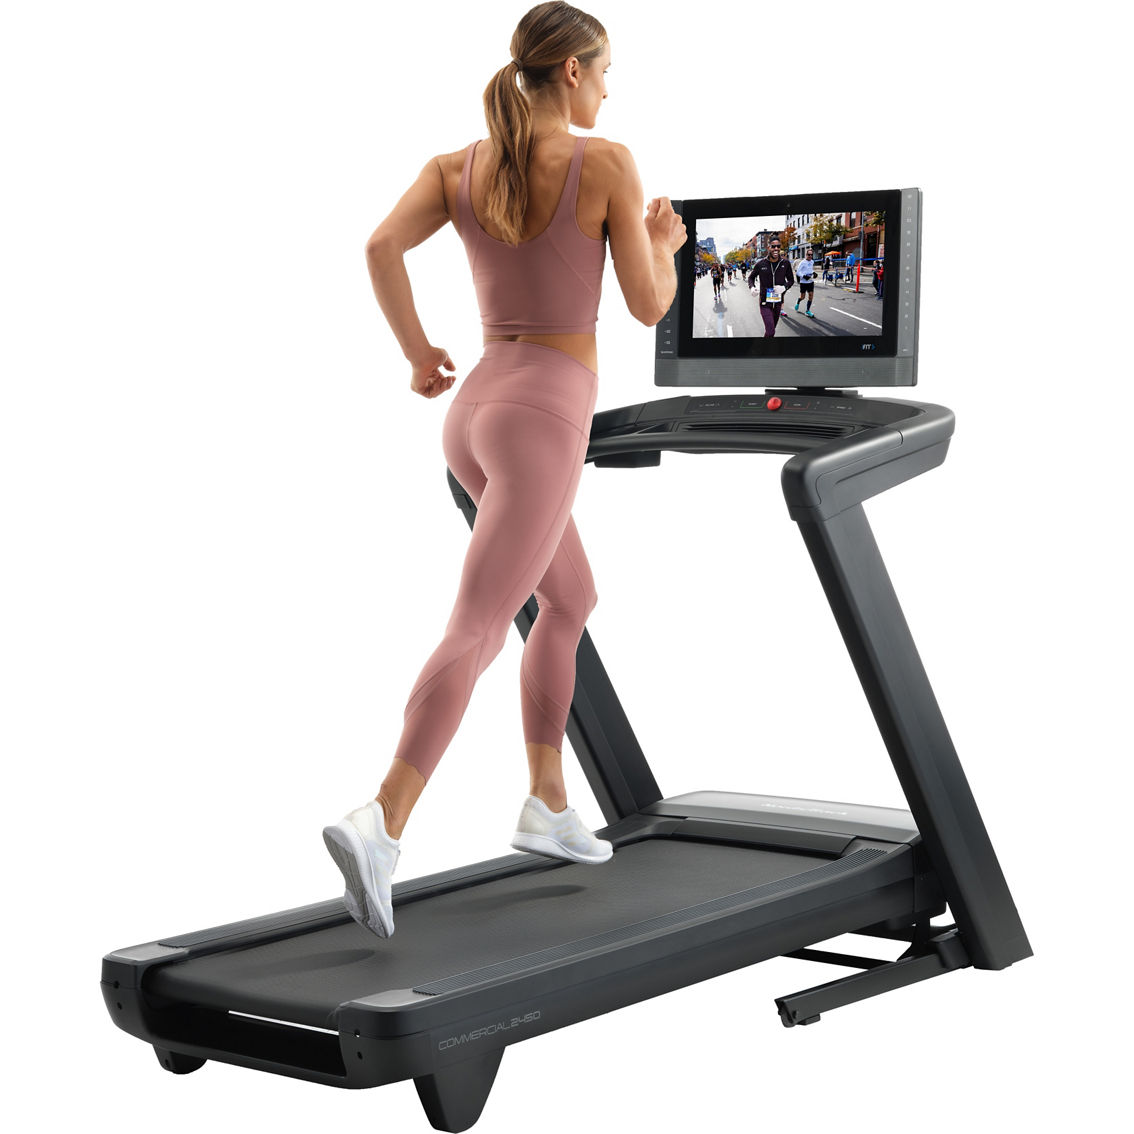 NordicTrack Commercial 2450 Treadmill - Image 4 of 4